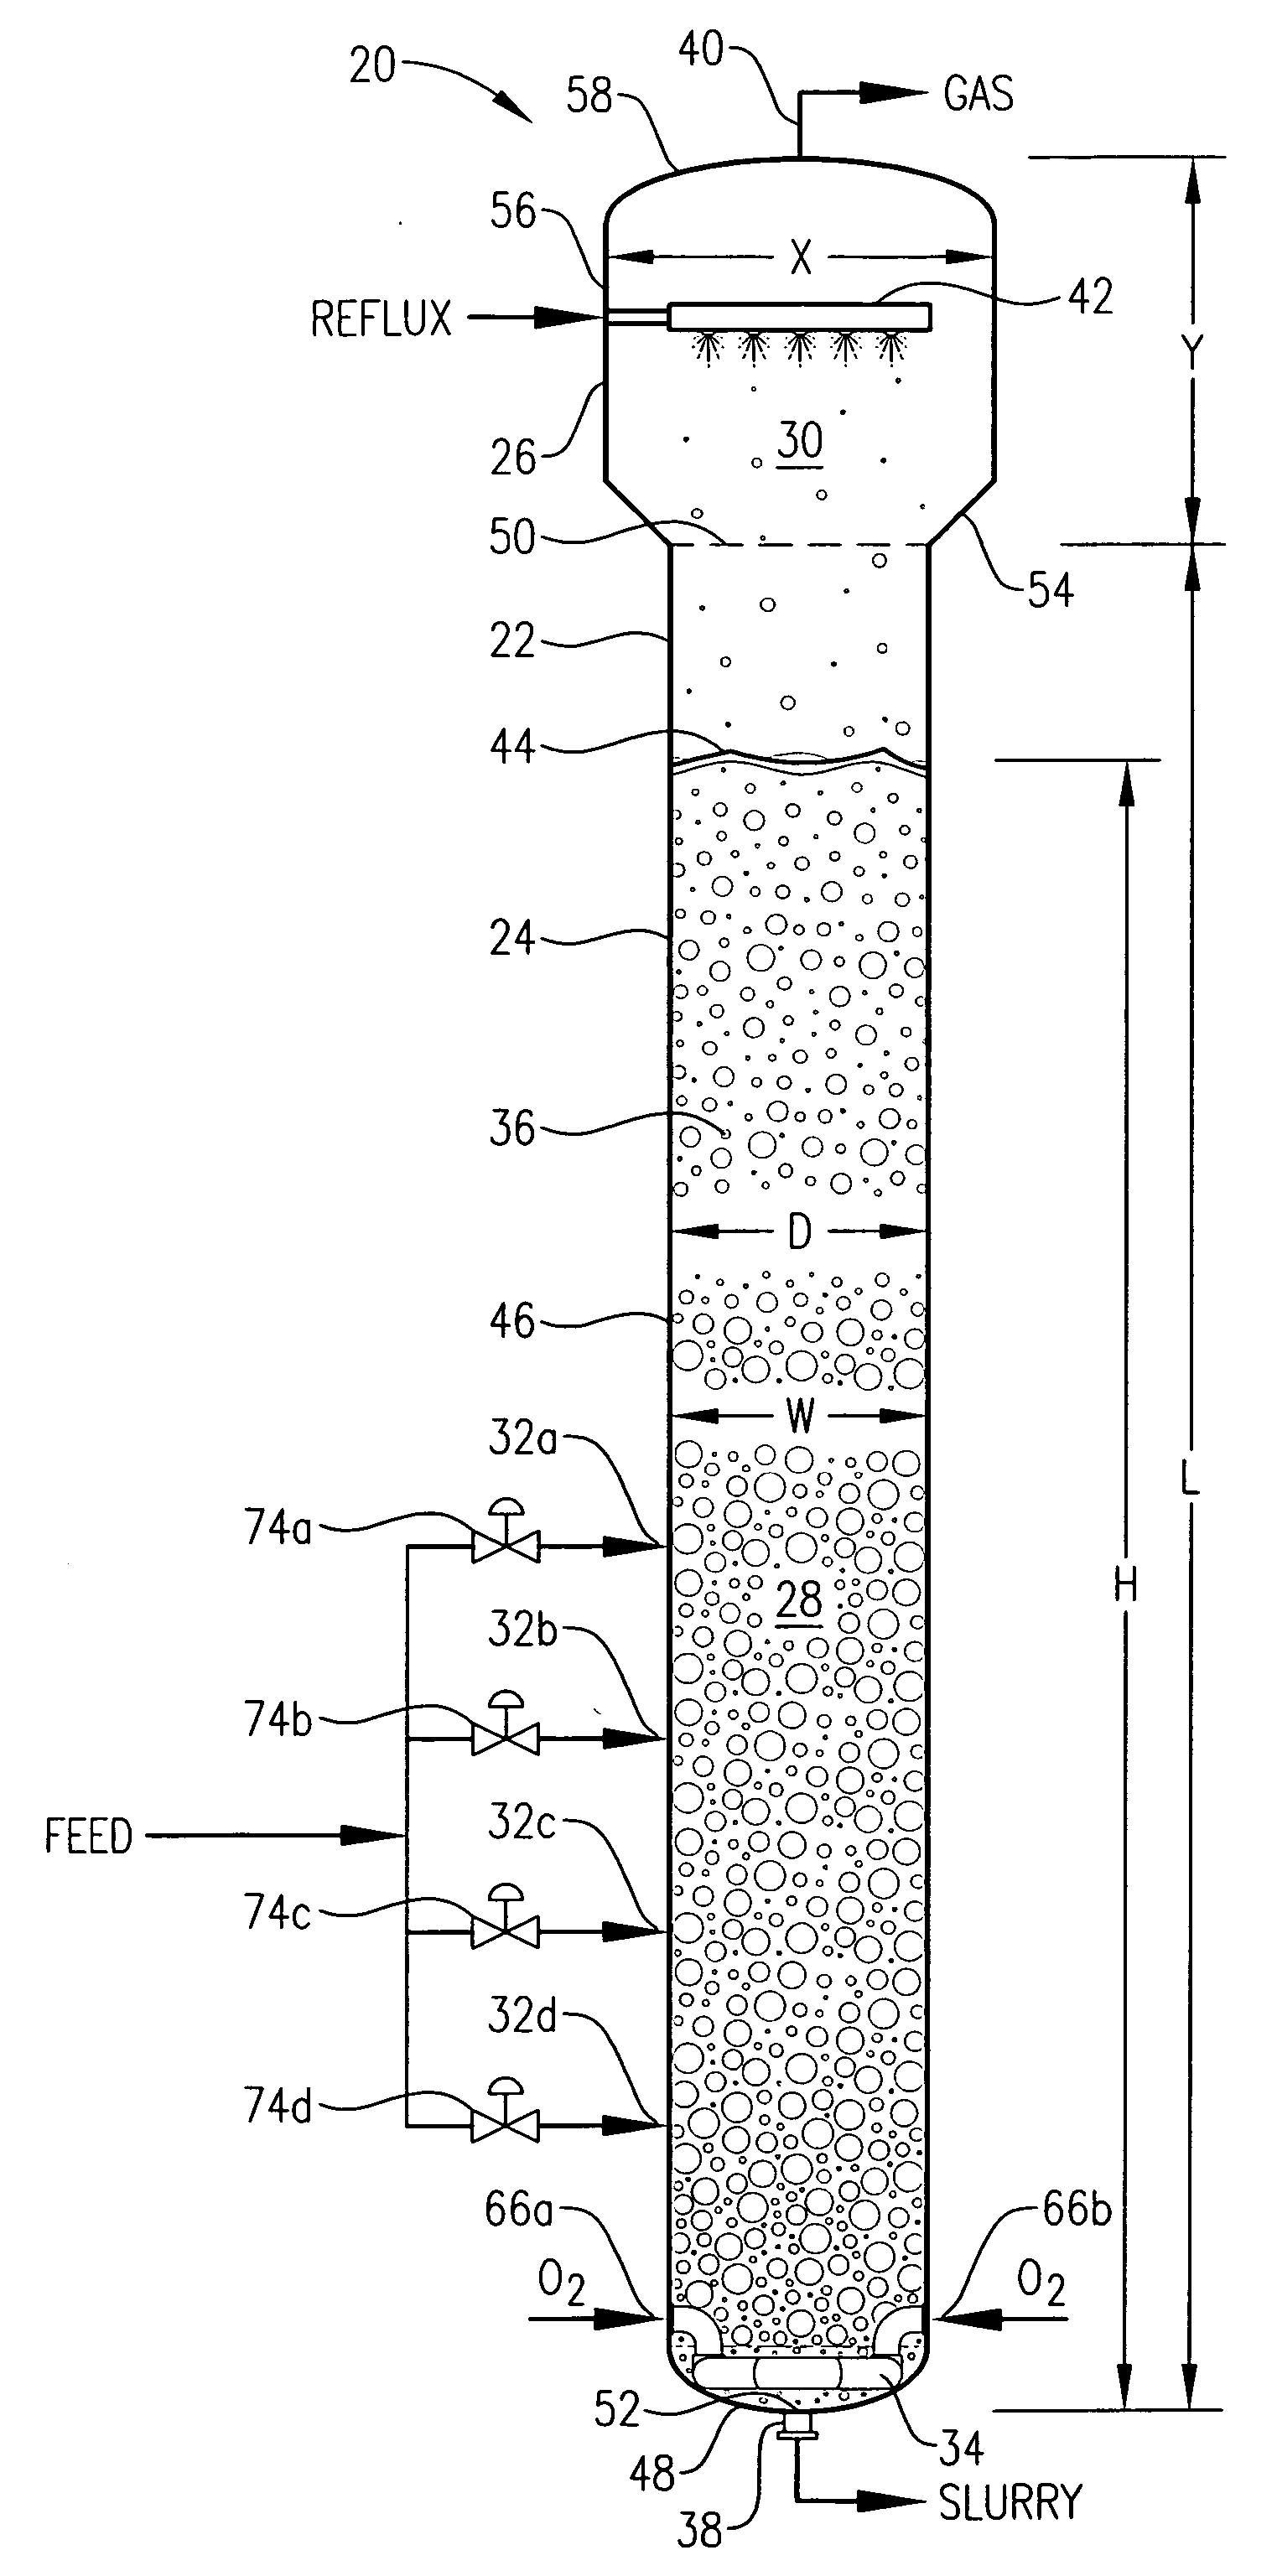 Oxidation system with internal secondary reactor